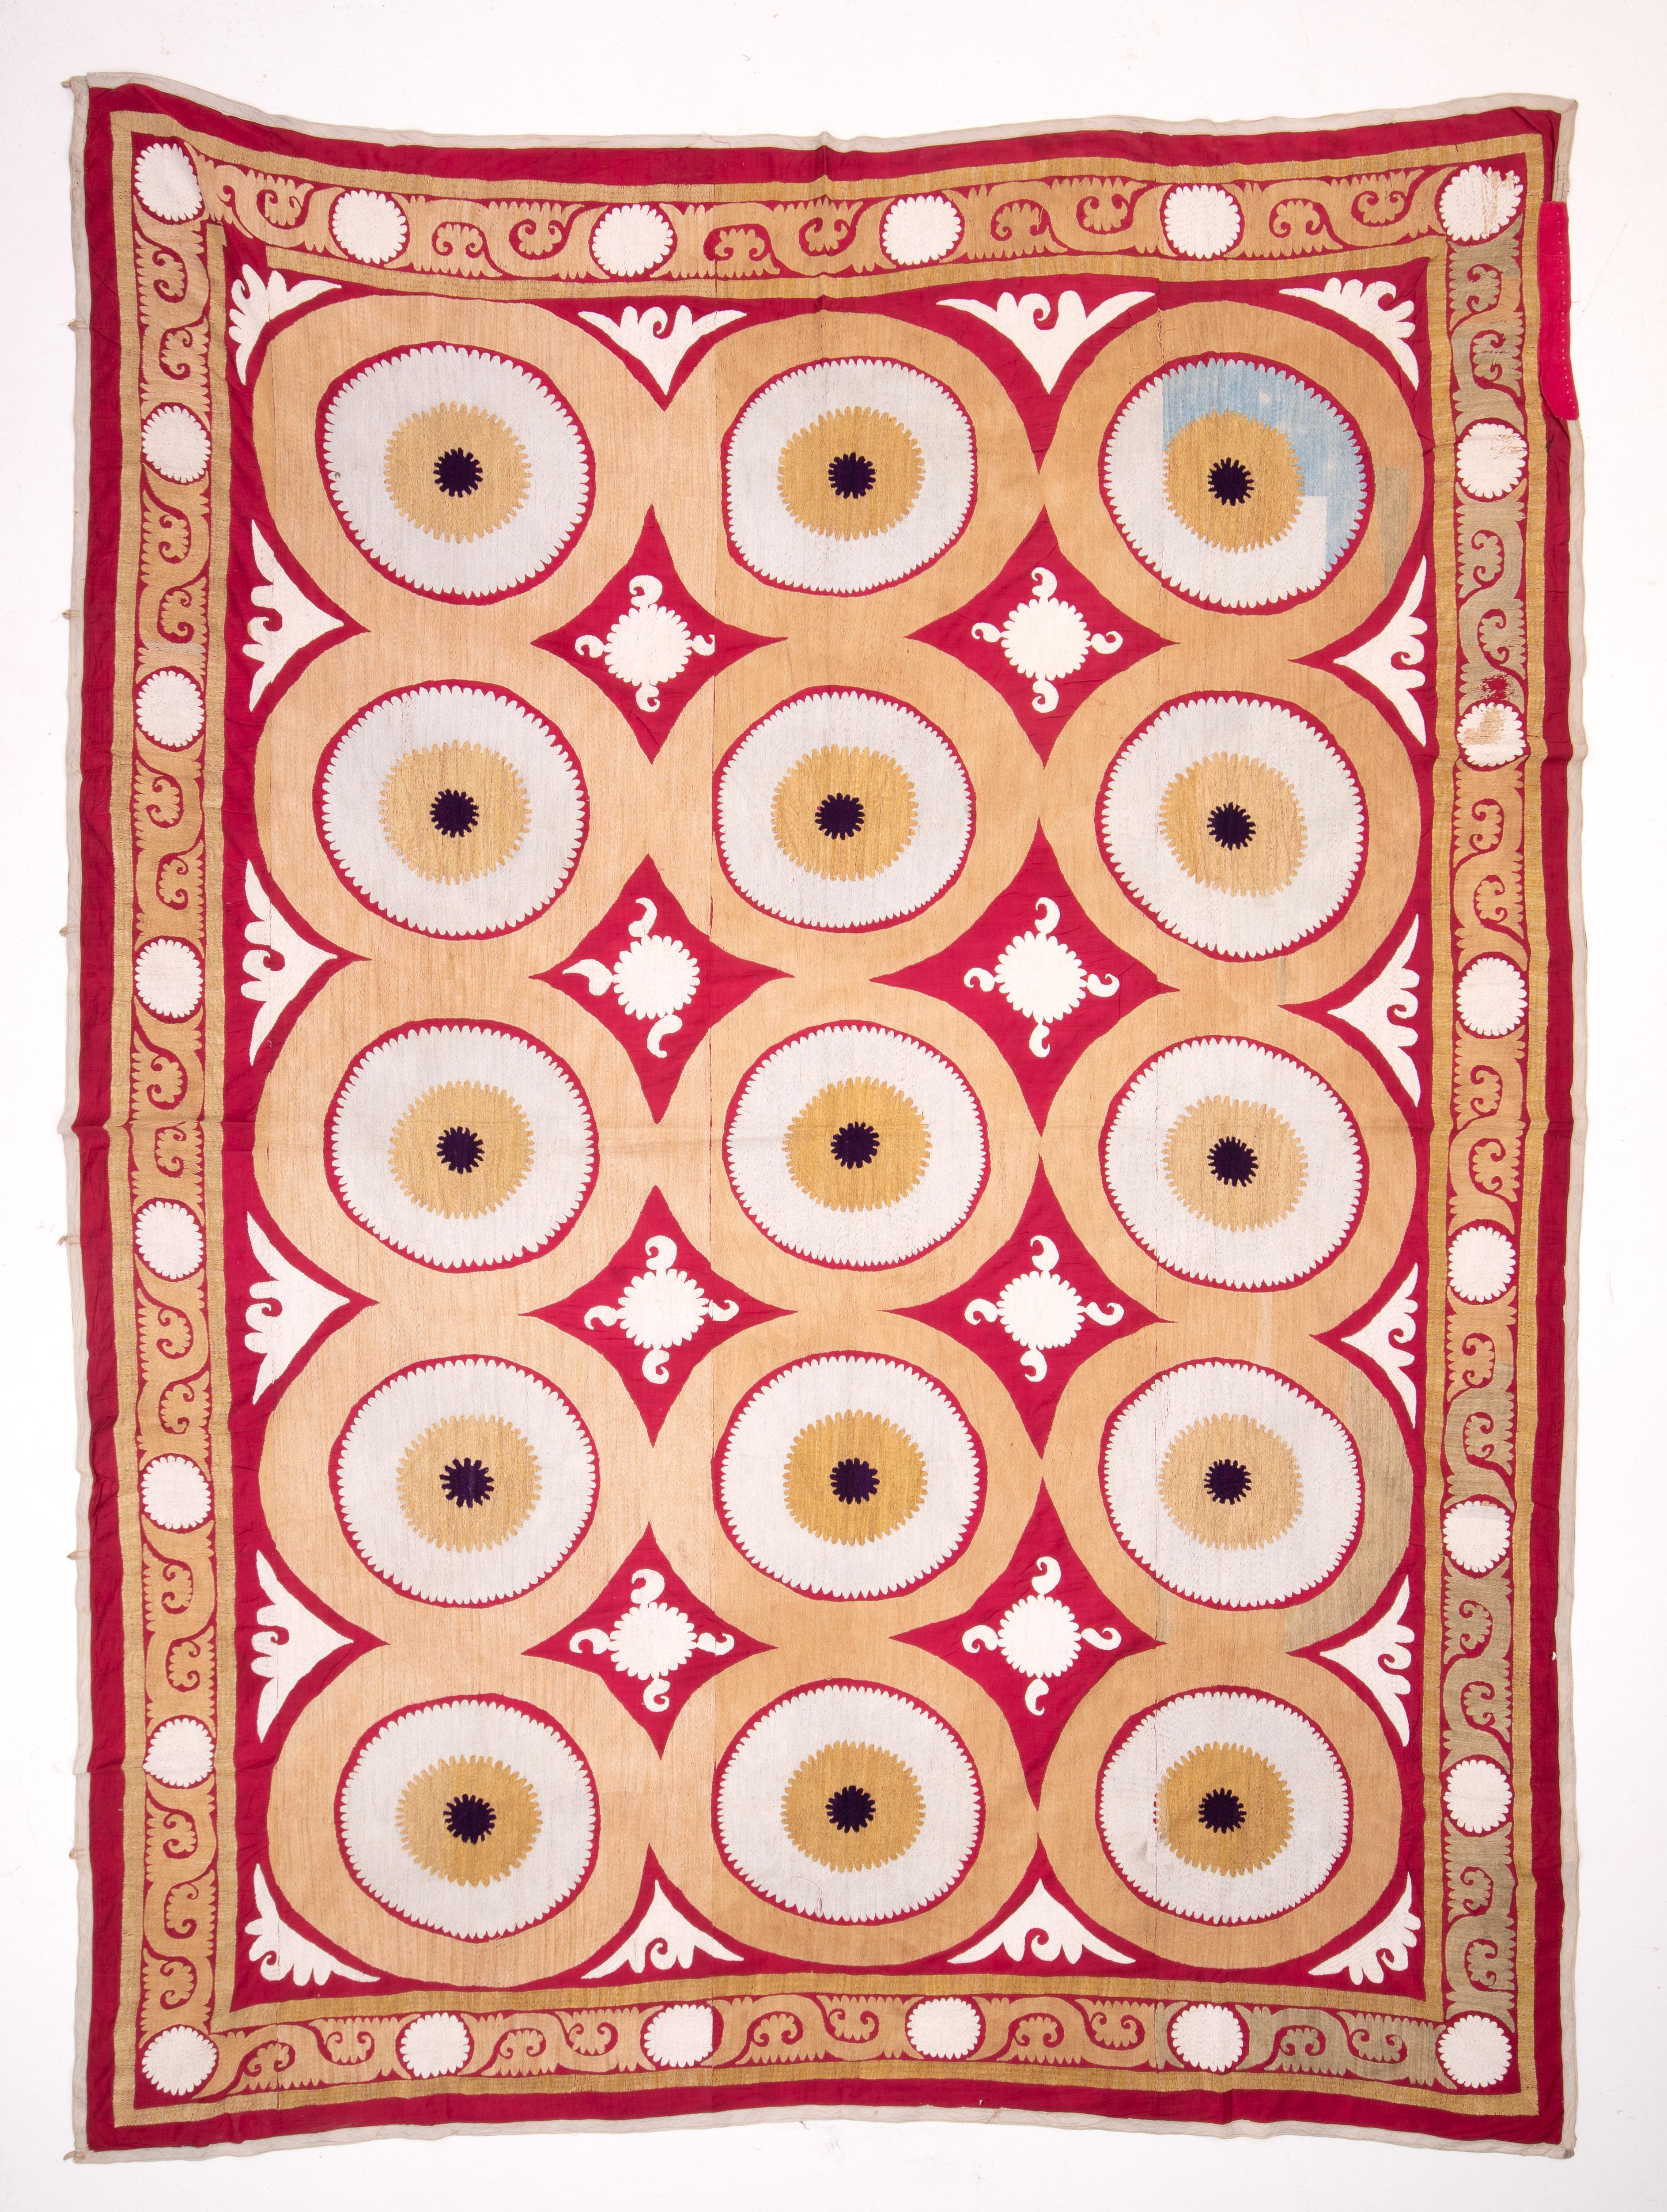 This suzani has a different design, embroidered in cotton on a cotton red ground. No lining.